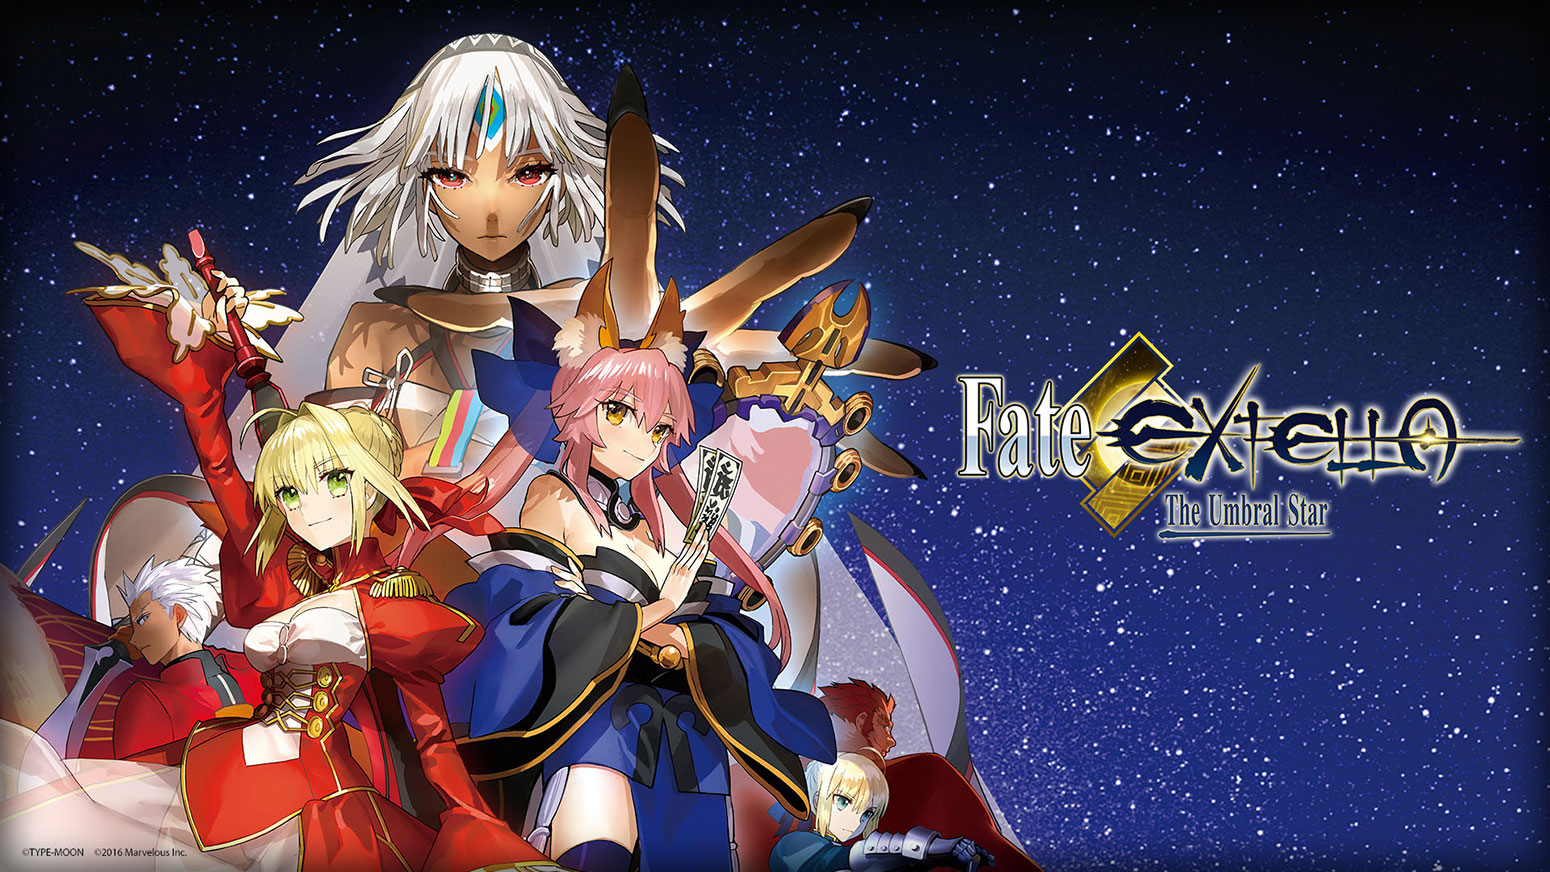 Fate/EXTELLA: The Umbral Star - Wallpaper 3